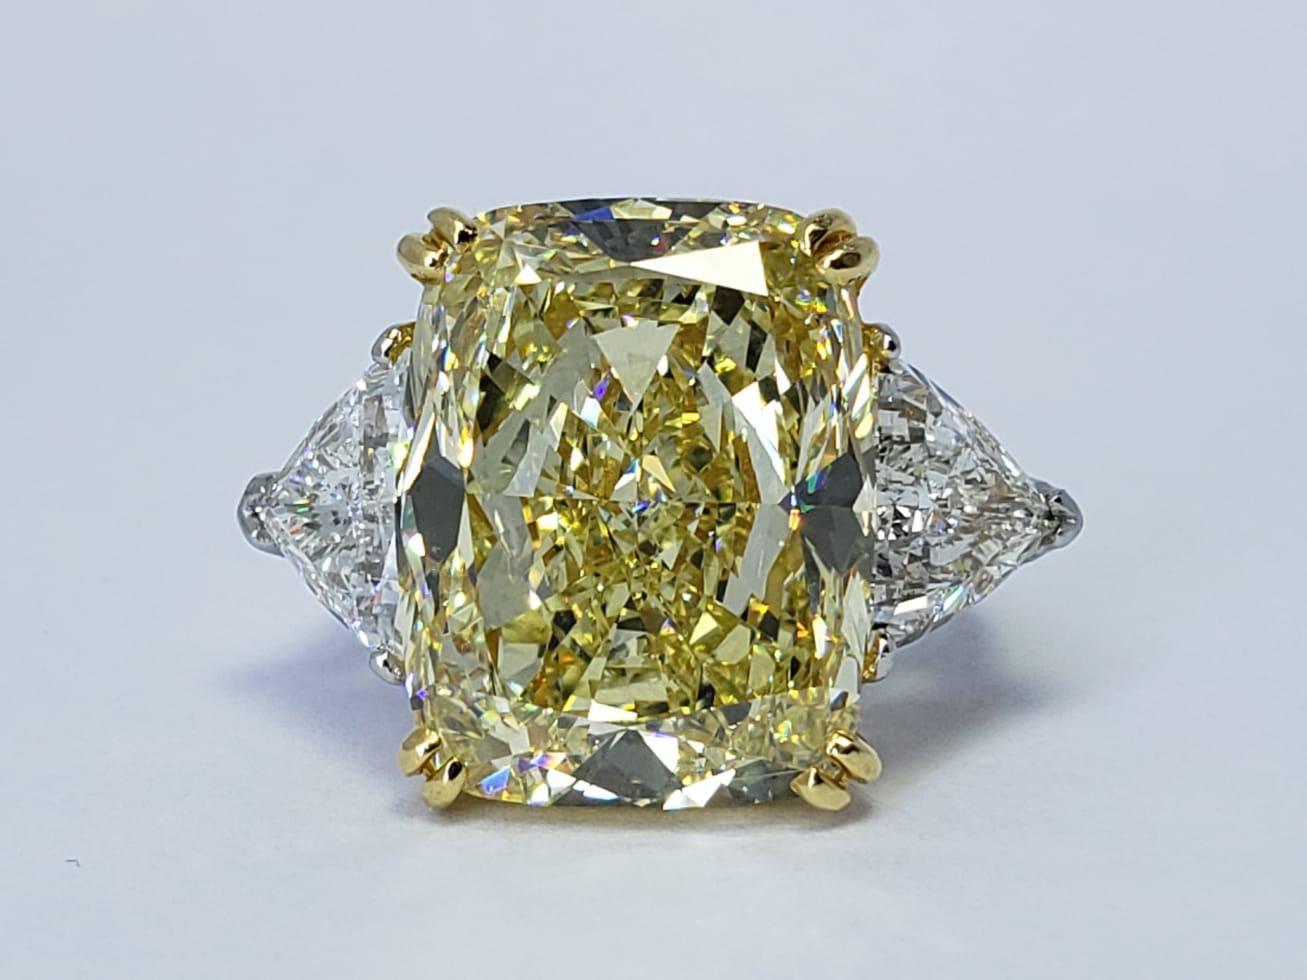 An exceptional Rosenberg Diamonds & Co. ring presenting an incredible GIA certified 16.48 carat fancy yellow cushion cut diamond upon a band of bright platinum and 18Kt yellow gold. The center stone is flanked by trillion side stones with a total